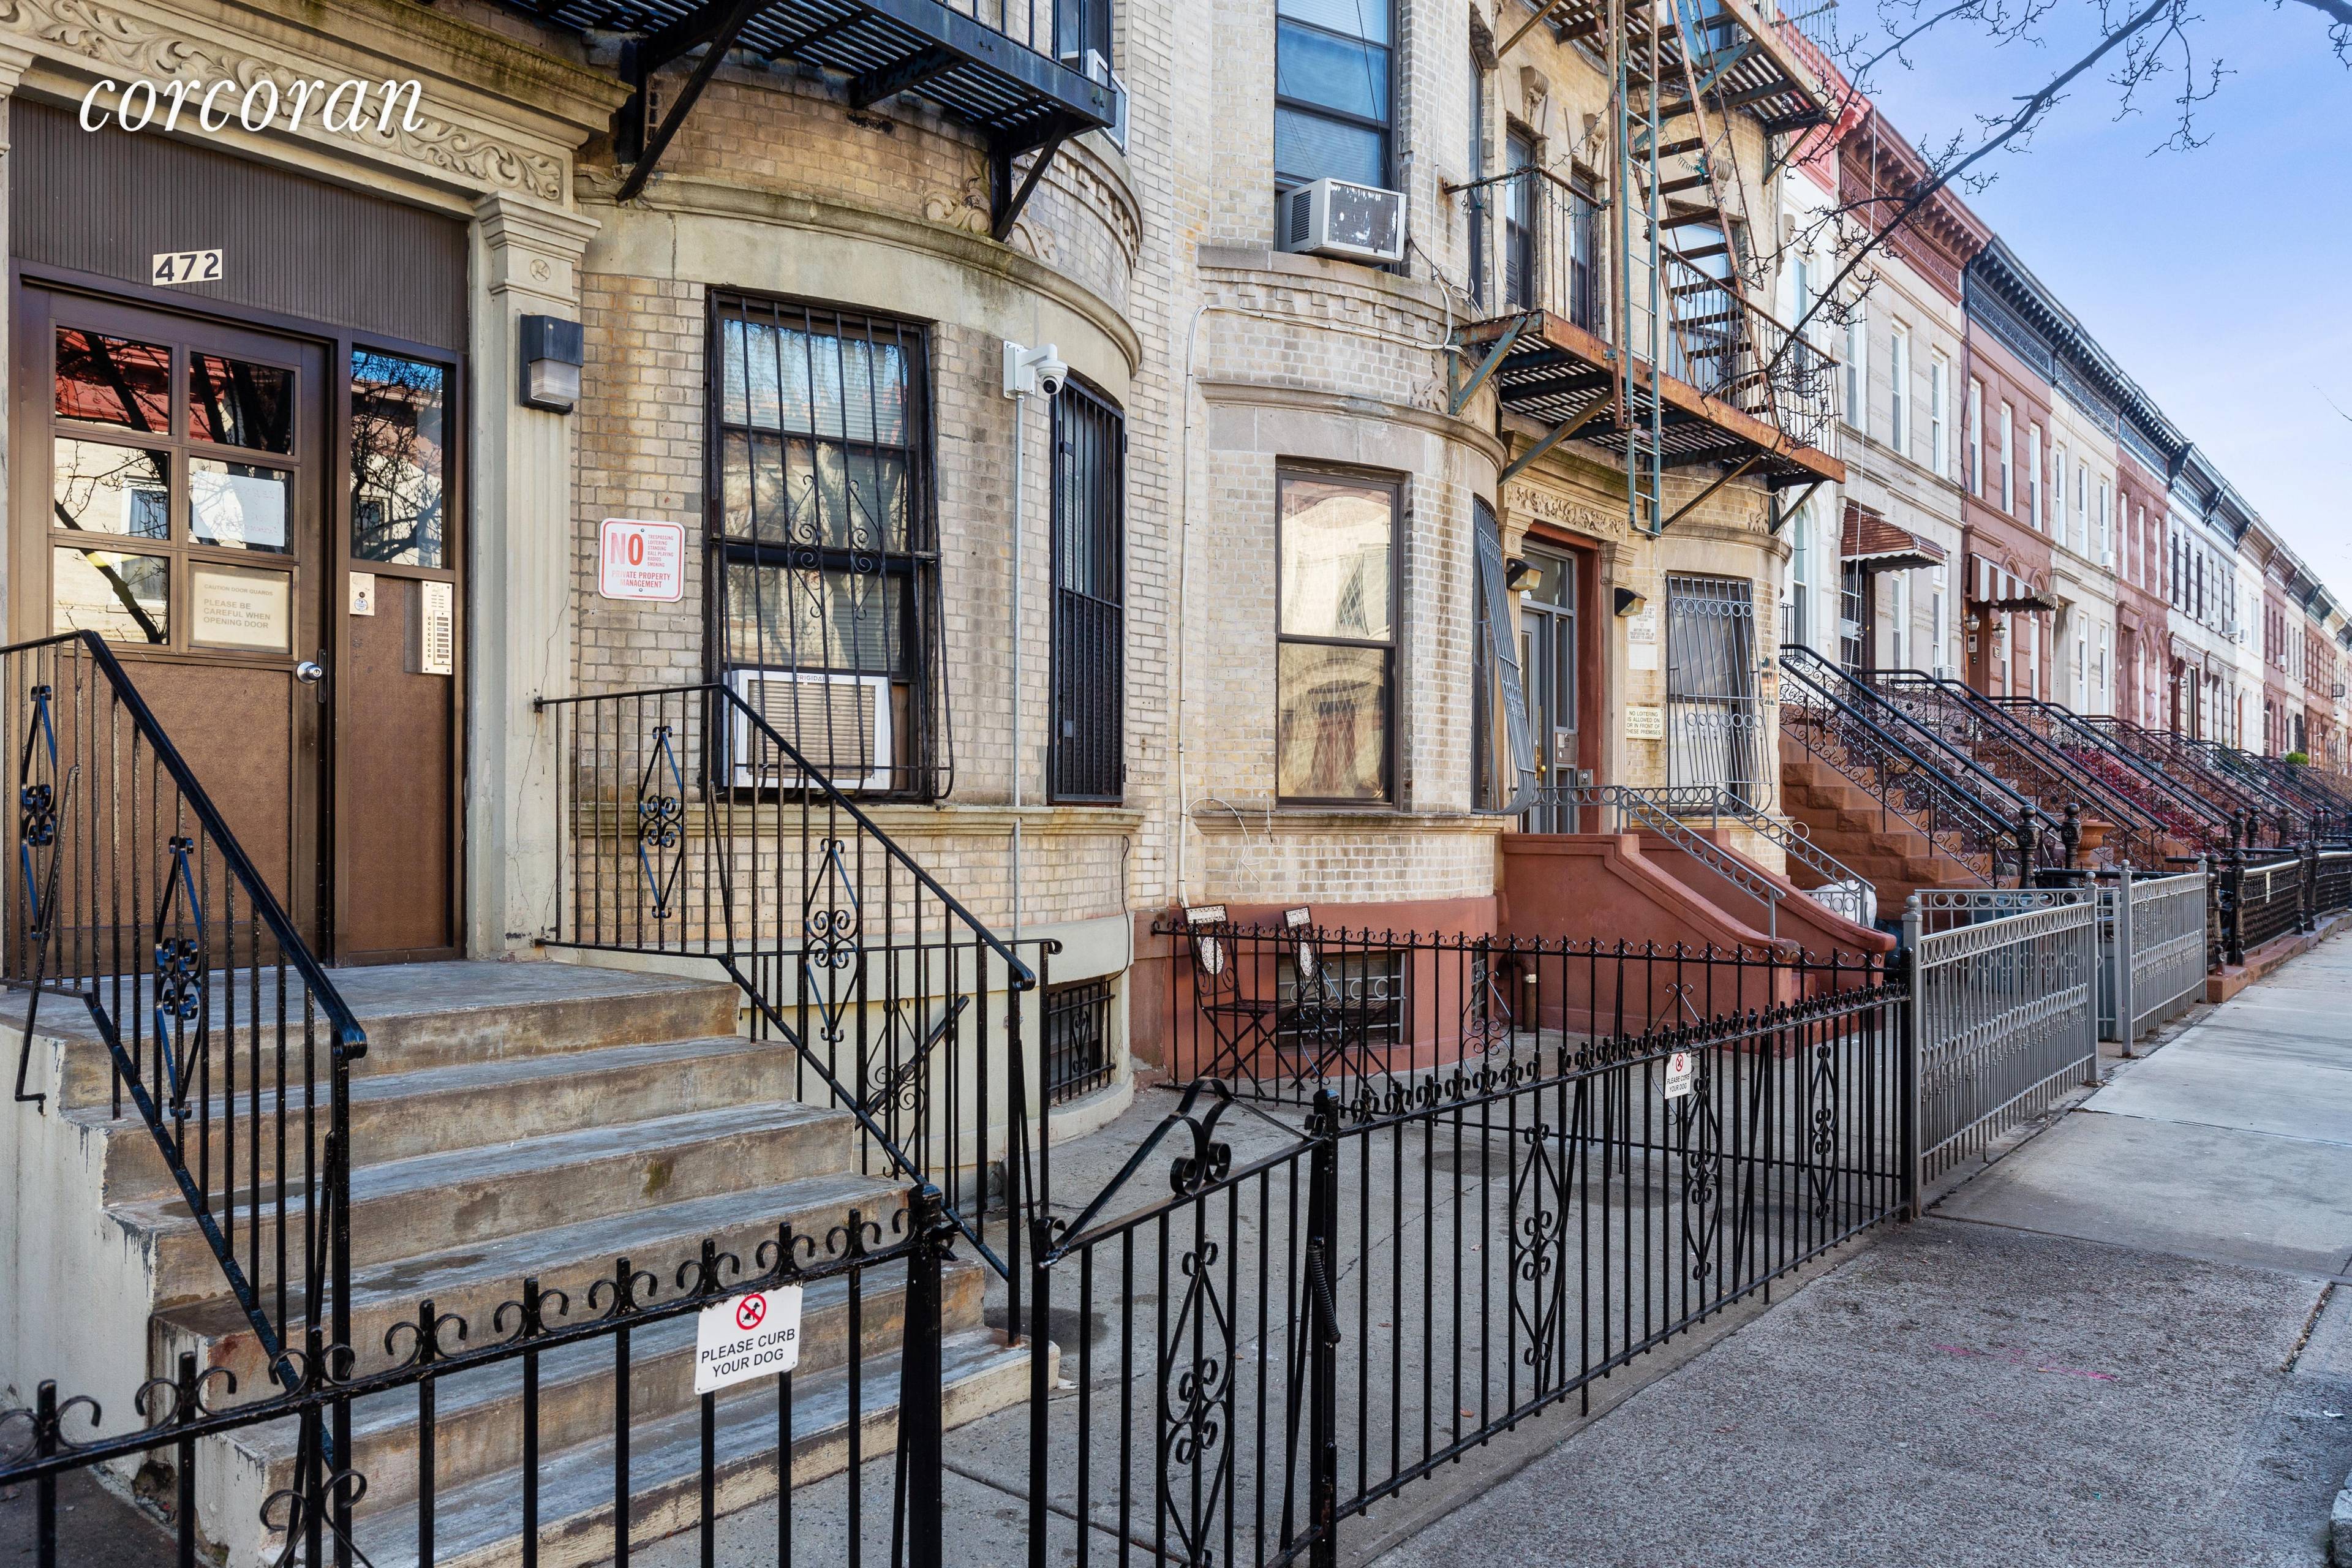 This charming 2 bedroom, 1 bath condo nested on a beautiful tree lined brownstone block is simply a gem.